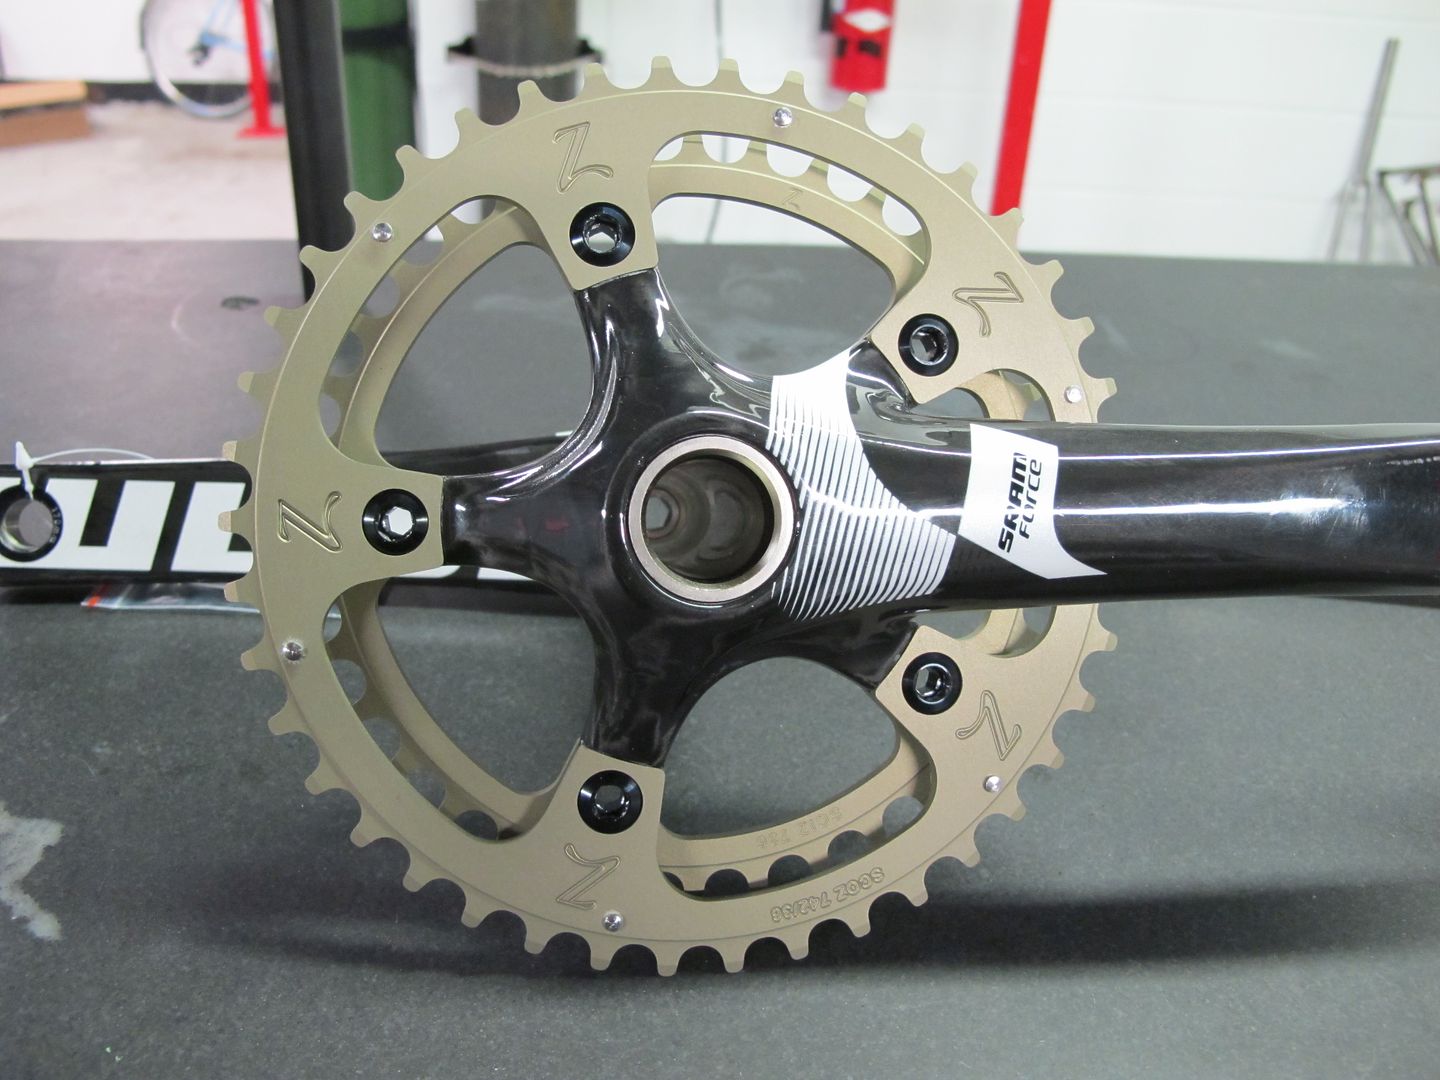 close ratio cyclocross chainrings with ramps and pins for excellent shifting performance